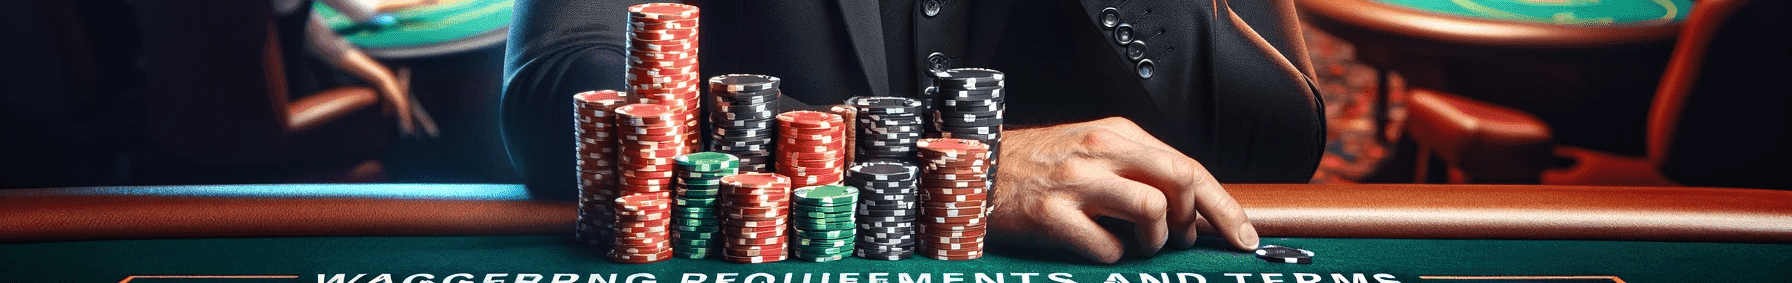 Wagering Requirements and Terms